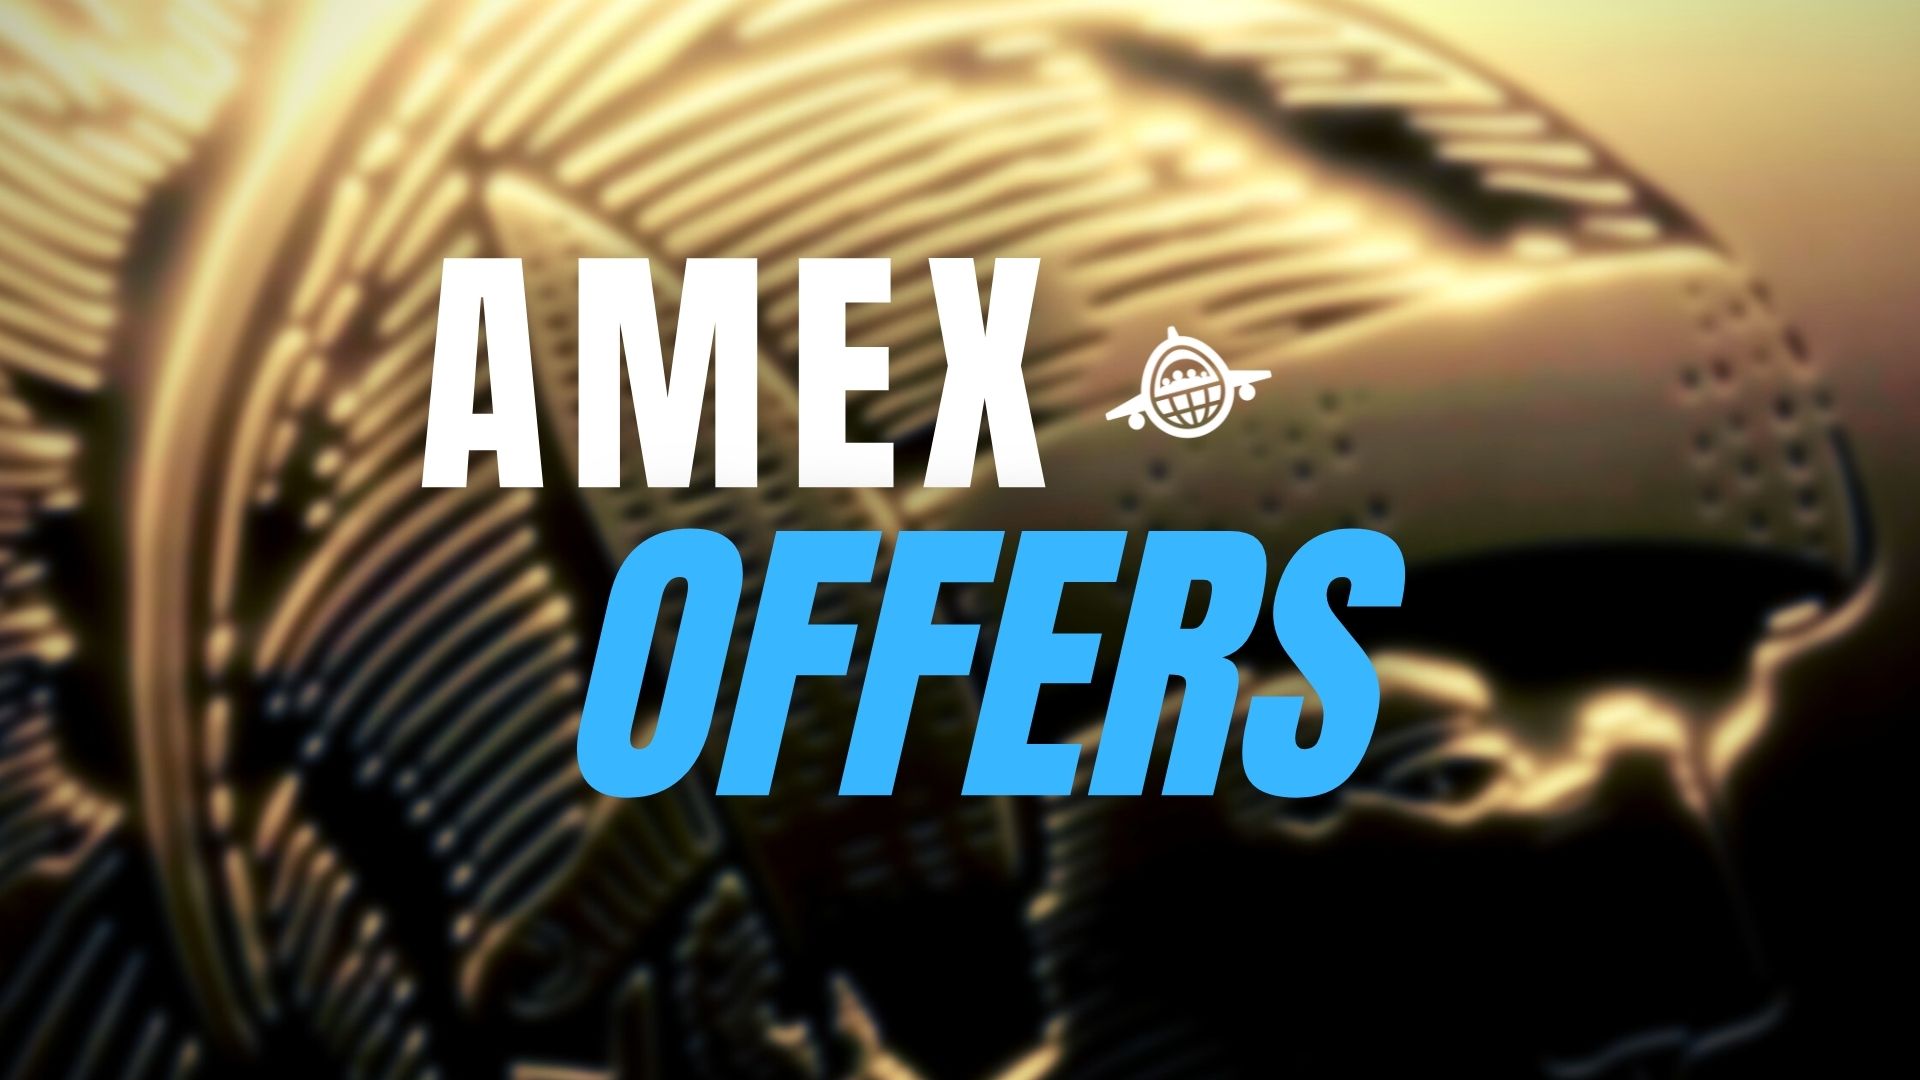 Lots of New Amex Offers